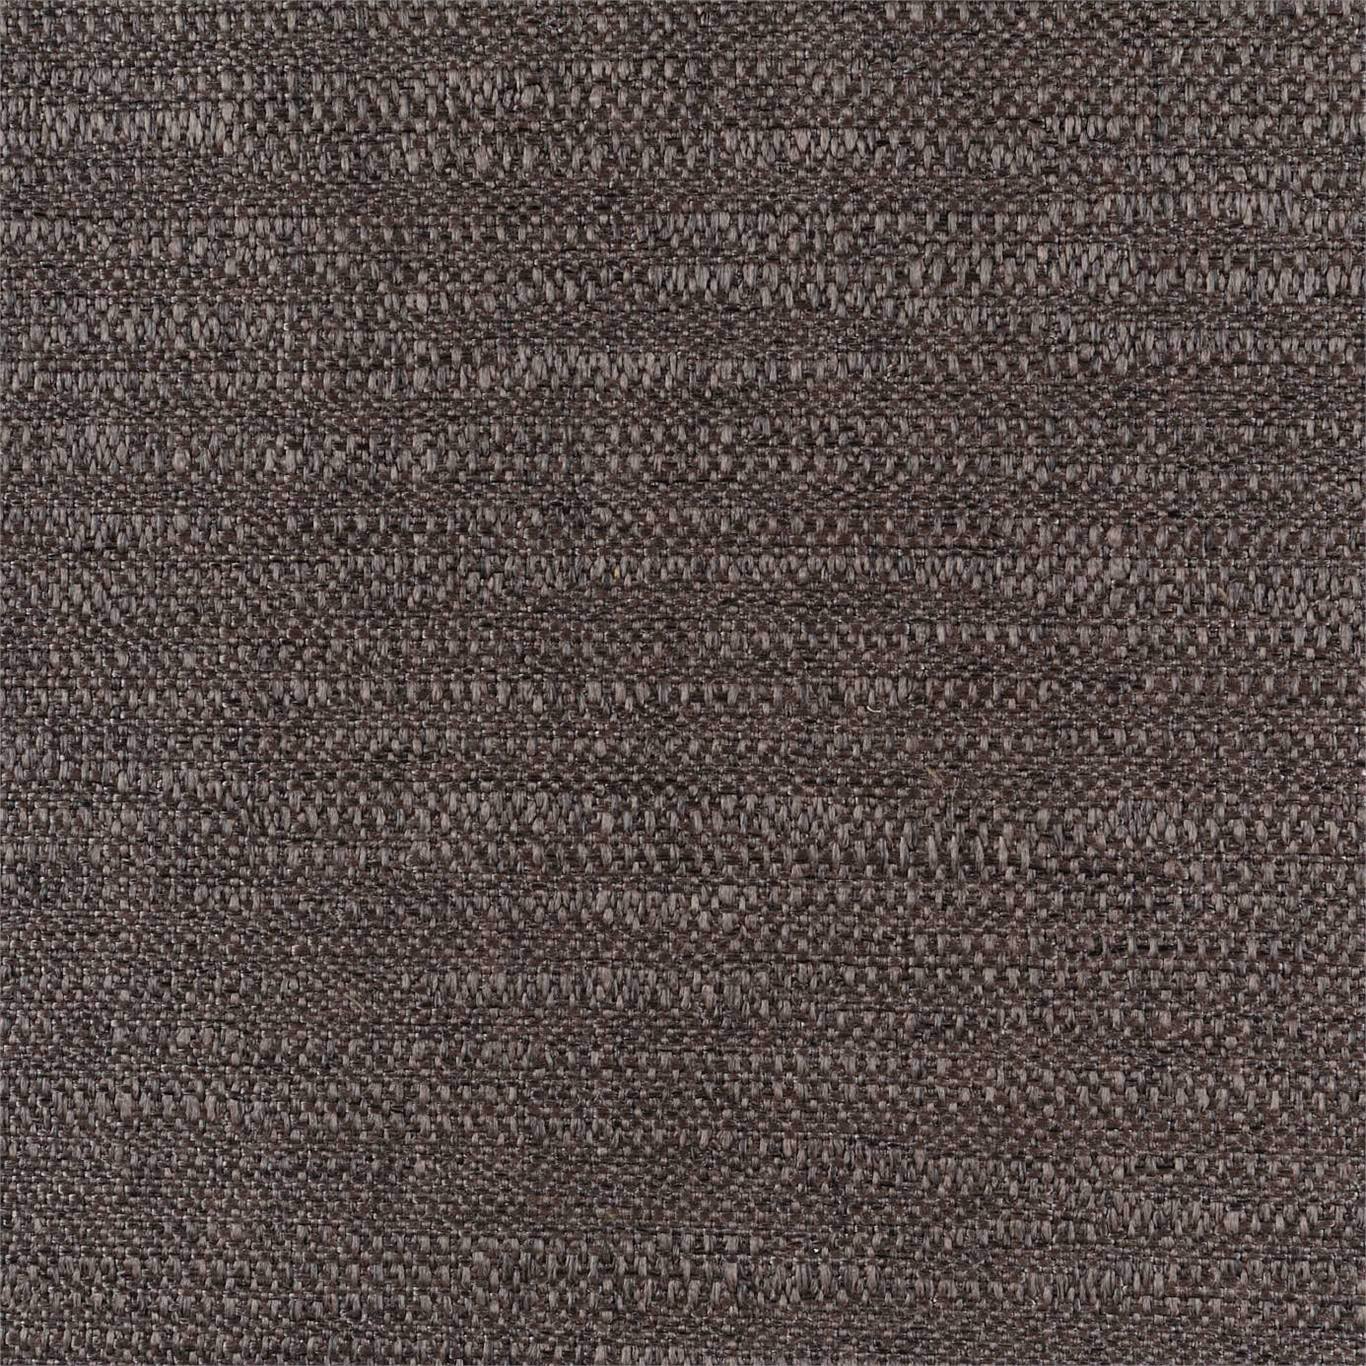 Extensive Truffle Fabric by HAR